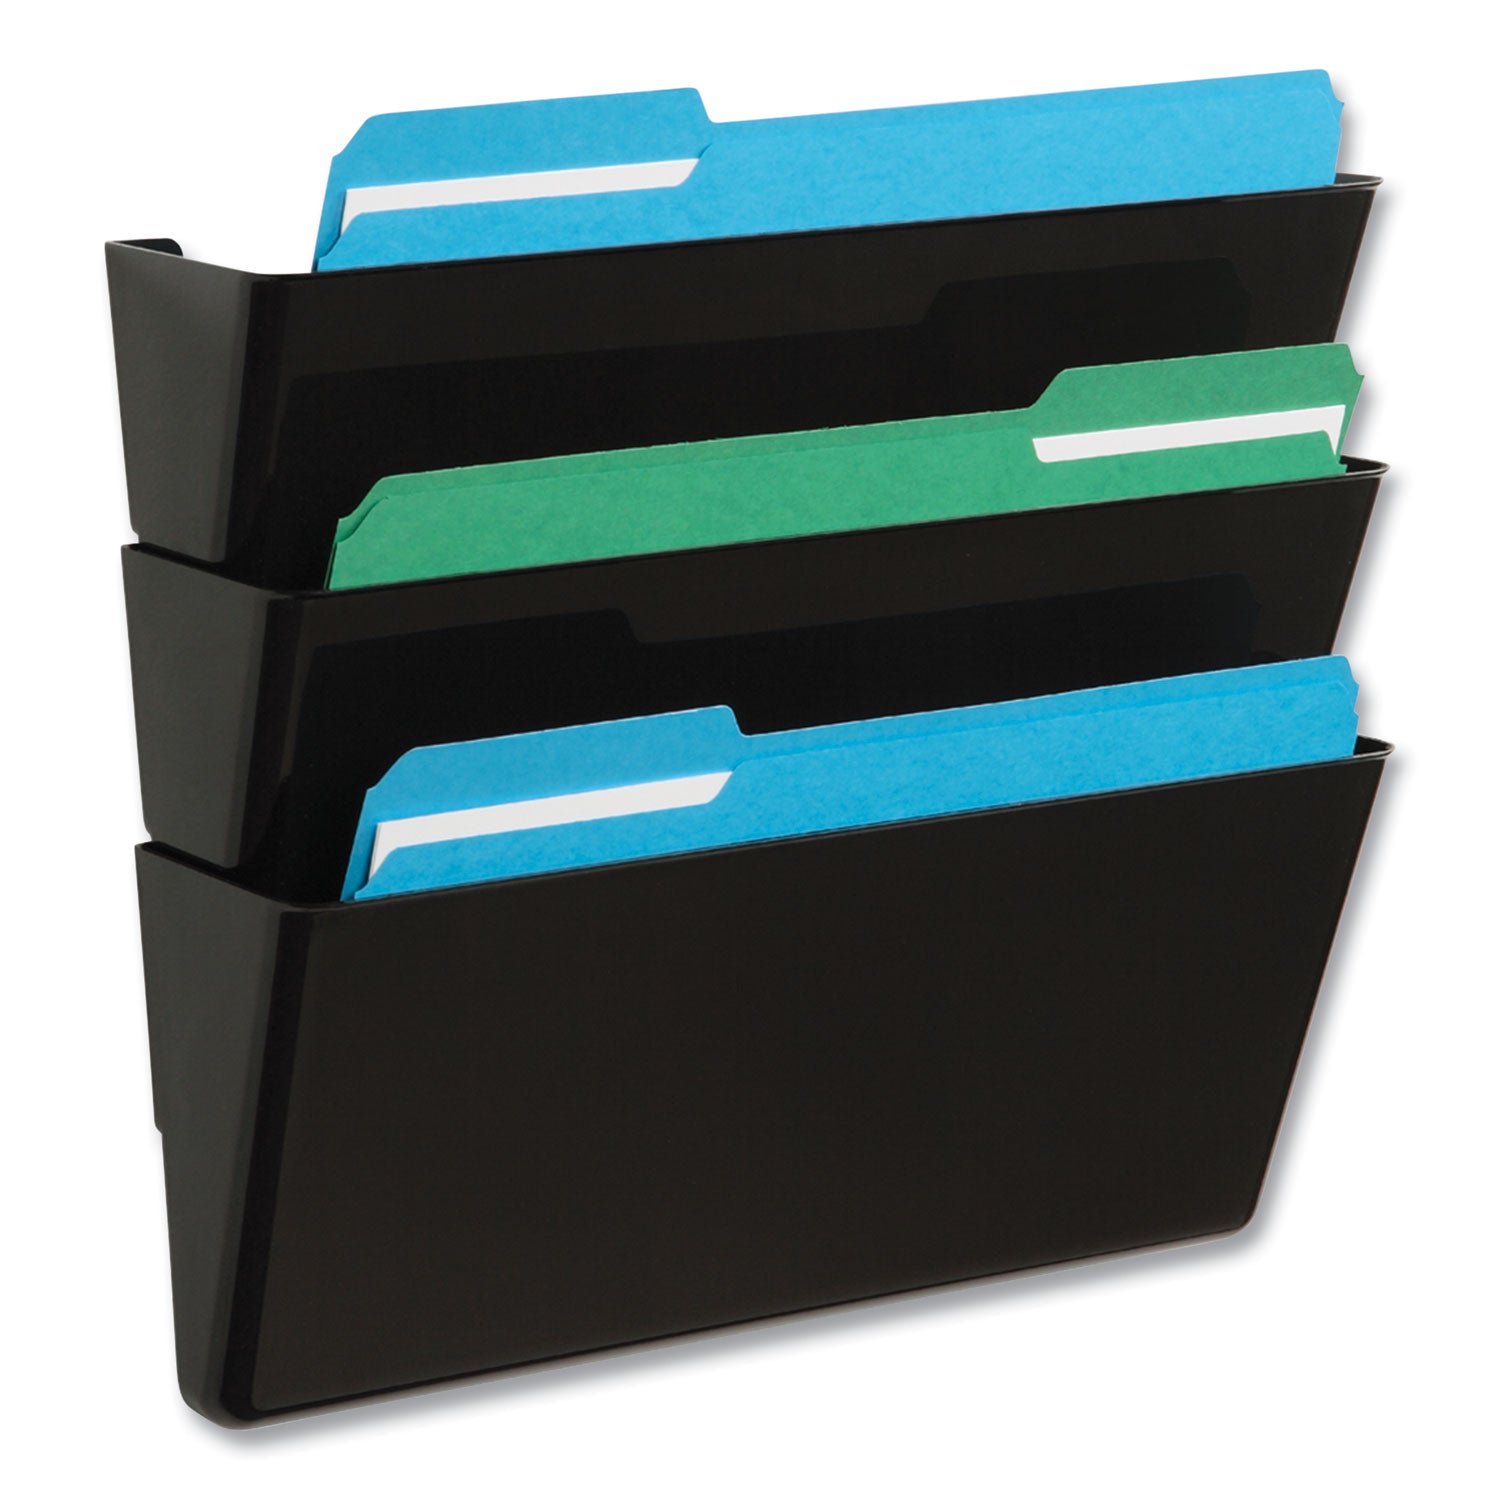 ez-link-stackable-docupocket-3-sections-legal-size-1625-x-4-x-19-black-ships-in-4-6-business-days_def74104 - 2